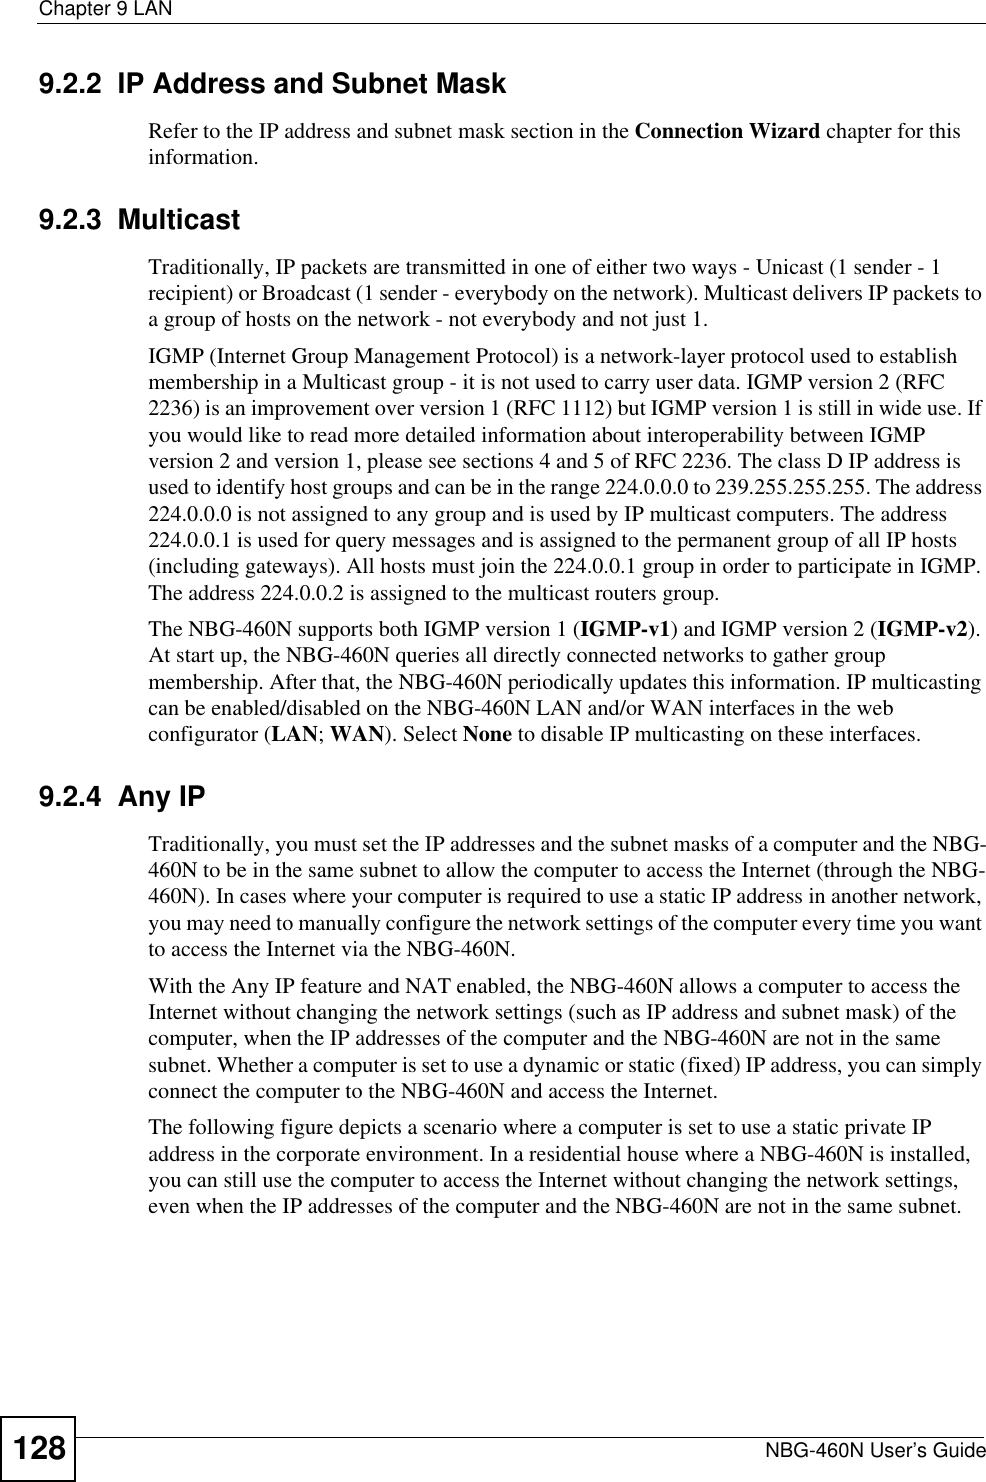 Chapter 9 LANNBG-460N User’s Guide1289.2.2  IP Address and Subnet MaskRefer to the IP address and subnet mask section in the Connection Wizard chapter for this information.9.2.3  MulticastTraditionally, IP packets are transmitted in one of either two ways - Unicast (1 sender - 1 recipient) or Broadcast (1 sender - everybody on the network). Multicast delivers IP packets to a group of hosts on the network - not everybody and not just 1. IGMP (Internet Group Management Protocol) is a network-layer protocol used to establish membership in a Multicast group - it is not used to carry user data. IGMP version 2 (RFC 2236) is an improvement over version 1 (RFC 1112) but IGMP version 1 is still in wide use. If you would like to read more detailed information about interoperability between IGMP version 2 and version 1, please see sections 4 and 5 of RFC 2236. The class D IP address is used to identify host groups and can be in the range 224.0.0.0 to 239.255.255.255. The address 224.0.0.0 is not assigned to any group and is used by IP multicast computers. The address 224.0.0.1 is used for query messages and is assigned to the permanent group of all IP hosts (including gateways). All hosts must join the 224.0.0.1 group in order to participate in IGMP. The address 224.0.0.2 is assigned to the multicast routers group. The NBG-460N supports both IGMP version 1 (IGMP-v1) and IGMP version 2 (IGMP-v2).At start up, the NBG-460N queries all directly connected networks to gather group membership. After that, the NBG-460N periodically updates this information. IP multicasting can be enabled/disabled on the NBG-460N LAN and/or WAN interfaces in the web configurator (LAN; WAN). Select None to disable IP multicasting on these interfaces.9.2.4  Any IPTraditionally, you must set the IP addresses and the subnet masks of a computer and the NBG-460N to be in the same subnet to allow the computer to access the Internet (through the NBG-460N). In cases where your computer is required to use a static IP address in another network, you may need to manually configure the network settings of the computer every time you want to access the Internet via the NBG-460N.With the Any IP feature and NAT enabled, the NBG-460N allows a computer to access the Internet without changing the network settings (such as IP address and subnet mask) of the computer, when the IP addresses of the computer and the NBG-460N are not in the same subnet. Whether a computer is set to use a dynamic or static (fixed) IP address, you can simply connect the computer to the NBG-460N and access the Internet.The following figure depicts a scenario where a computer is set to use a static private IP address in the corporate environment. In a residential house where a NBG-460N is installed, you can still use the computer to access the Internet without changing the network settings, even when the IP addresses of the computer and the NBG-460N are not in the same subnet. 